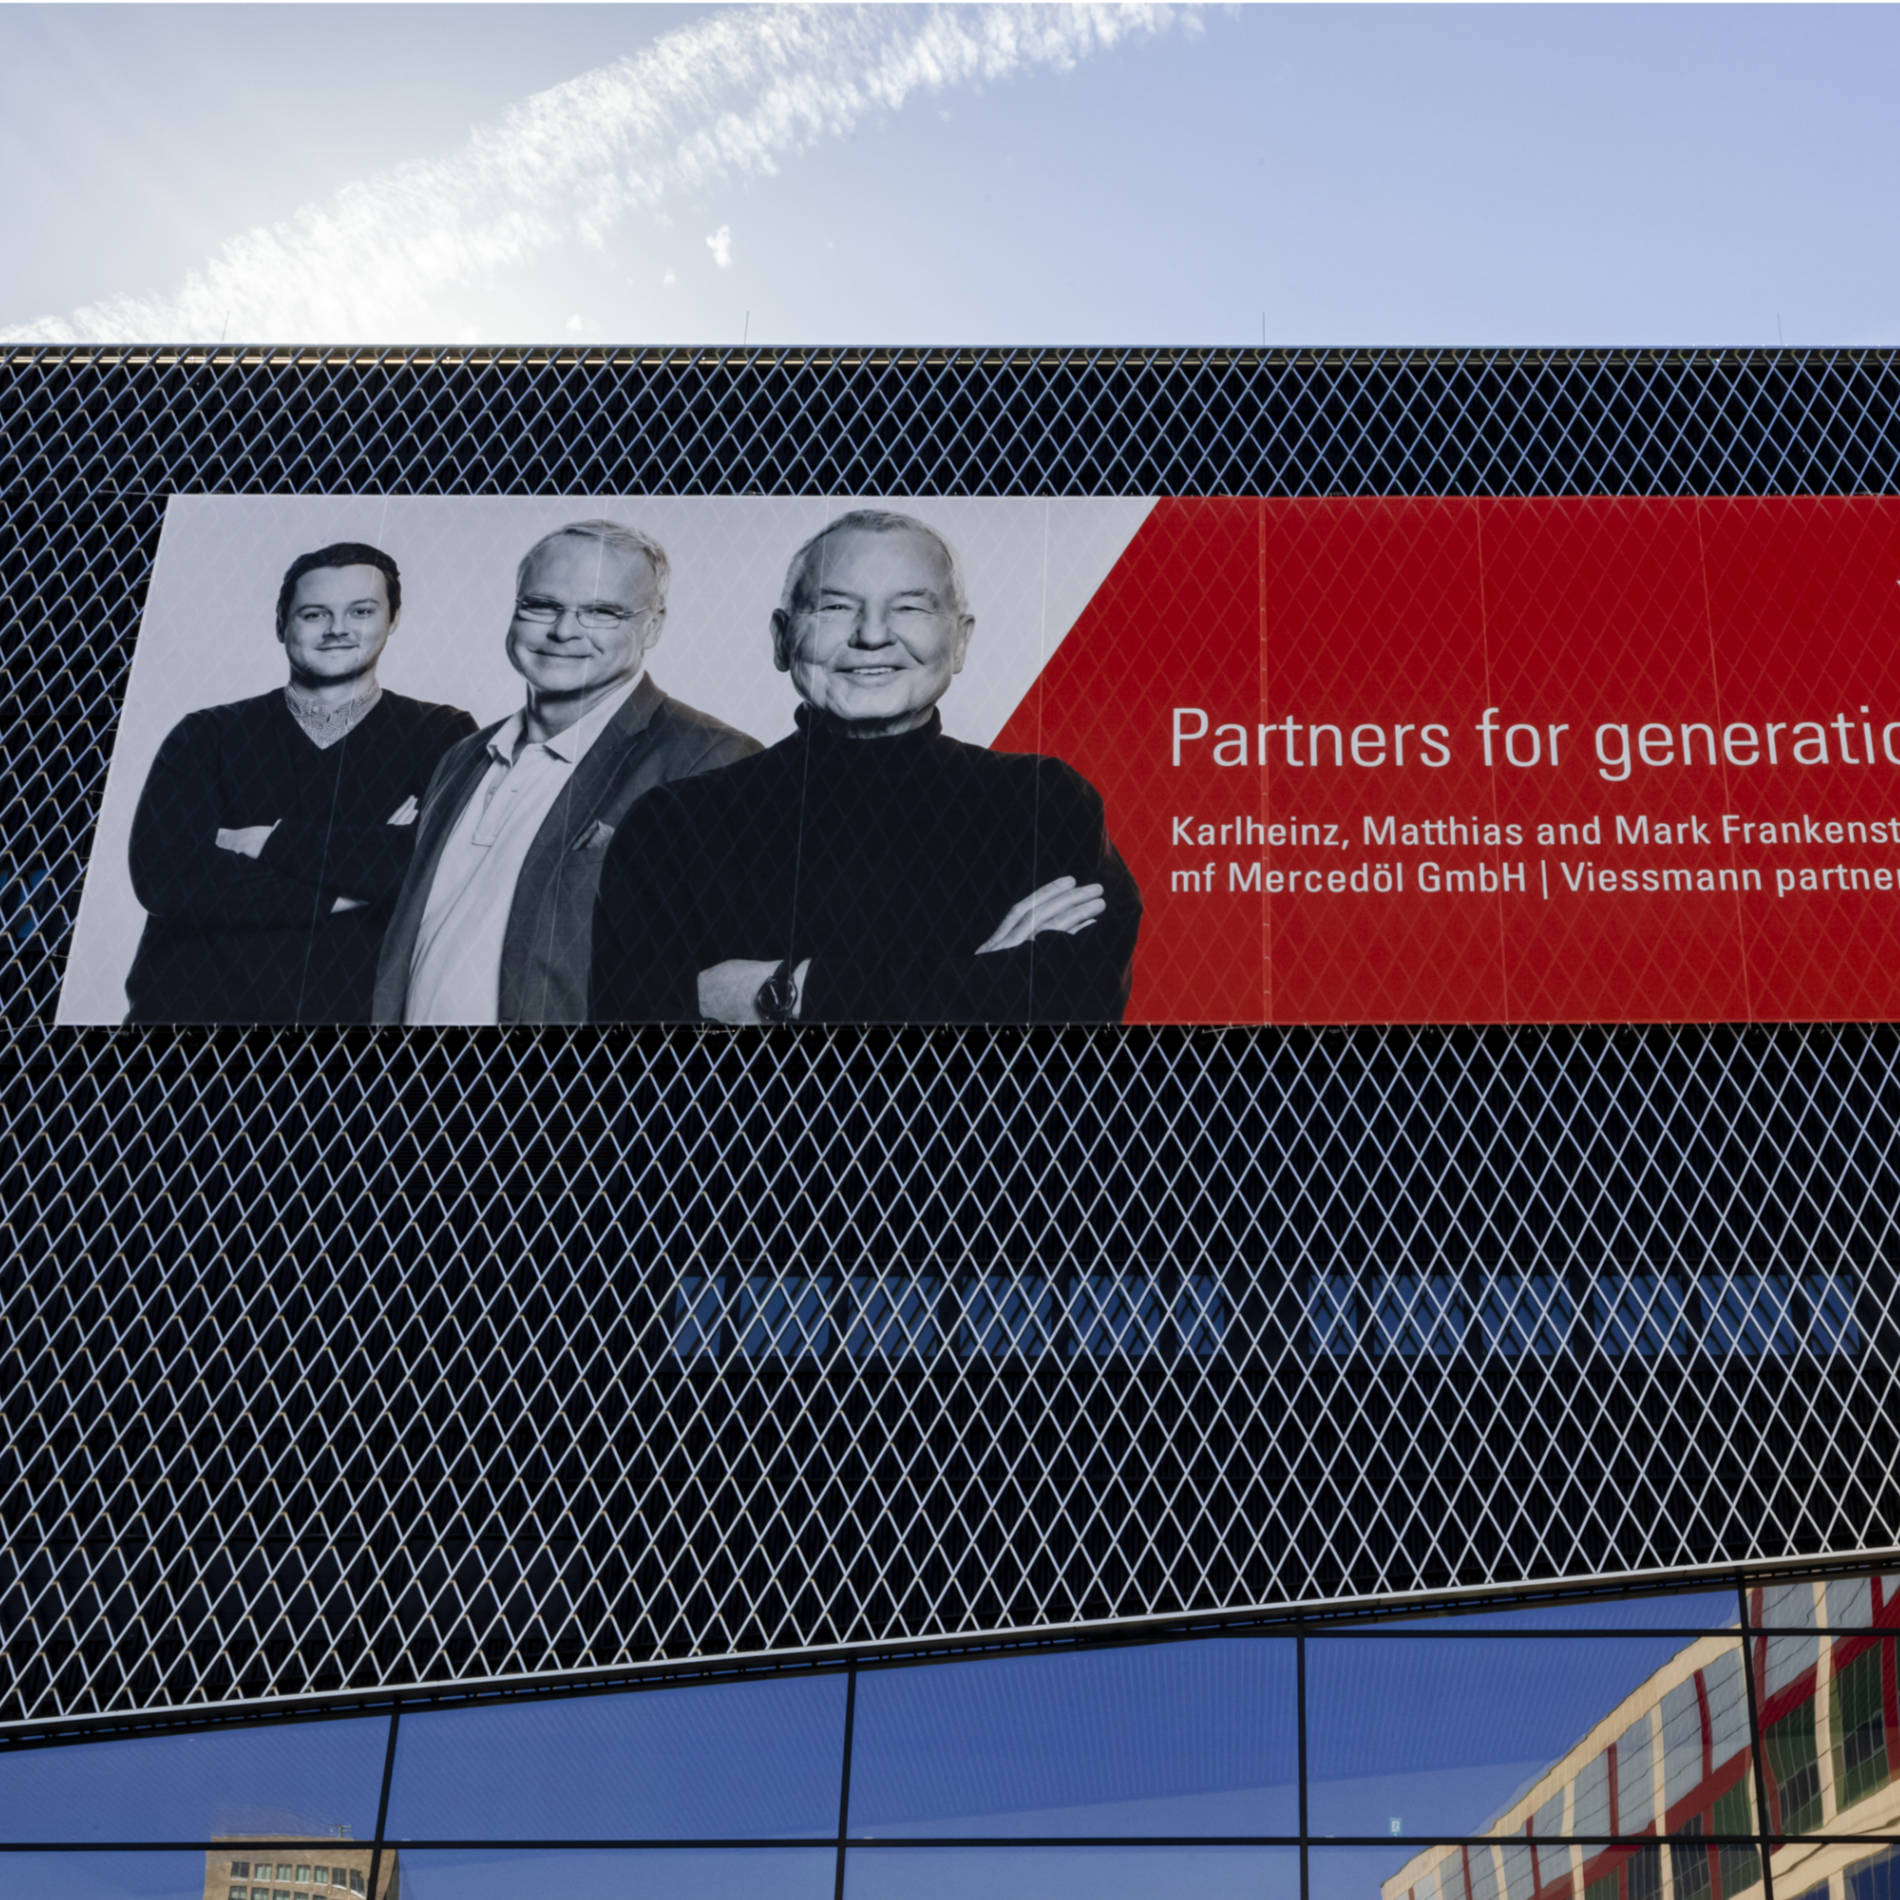 Large-format advertising spaces on a hall at Messe Frankfurt